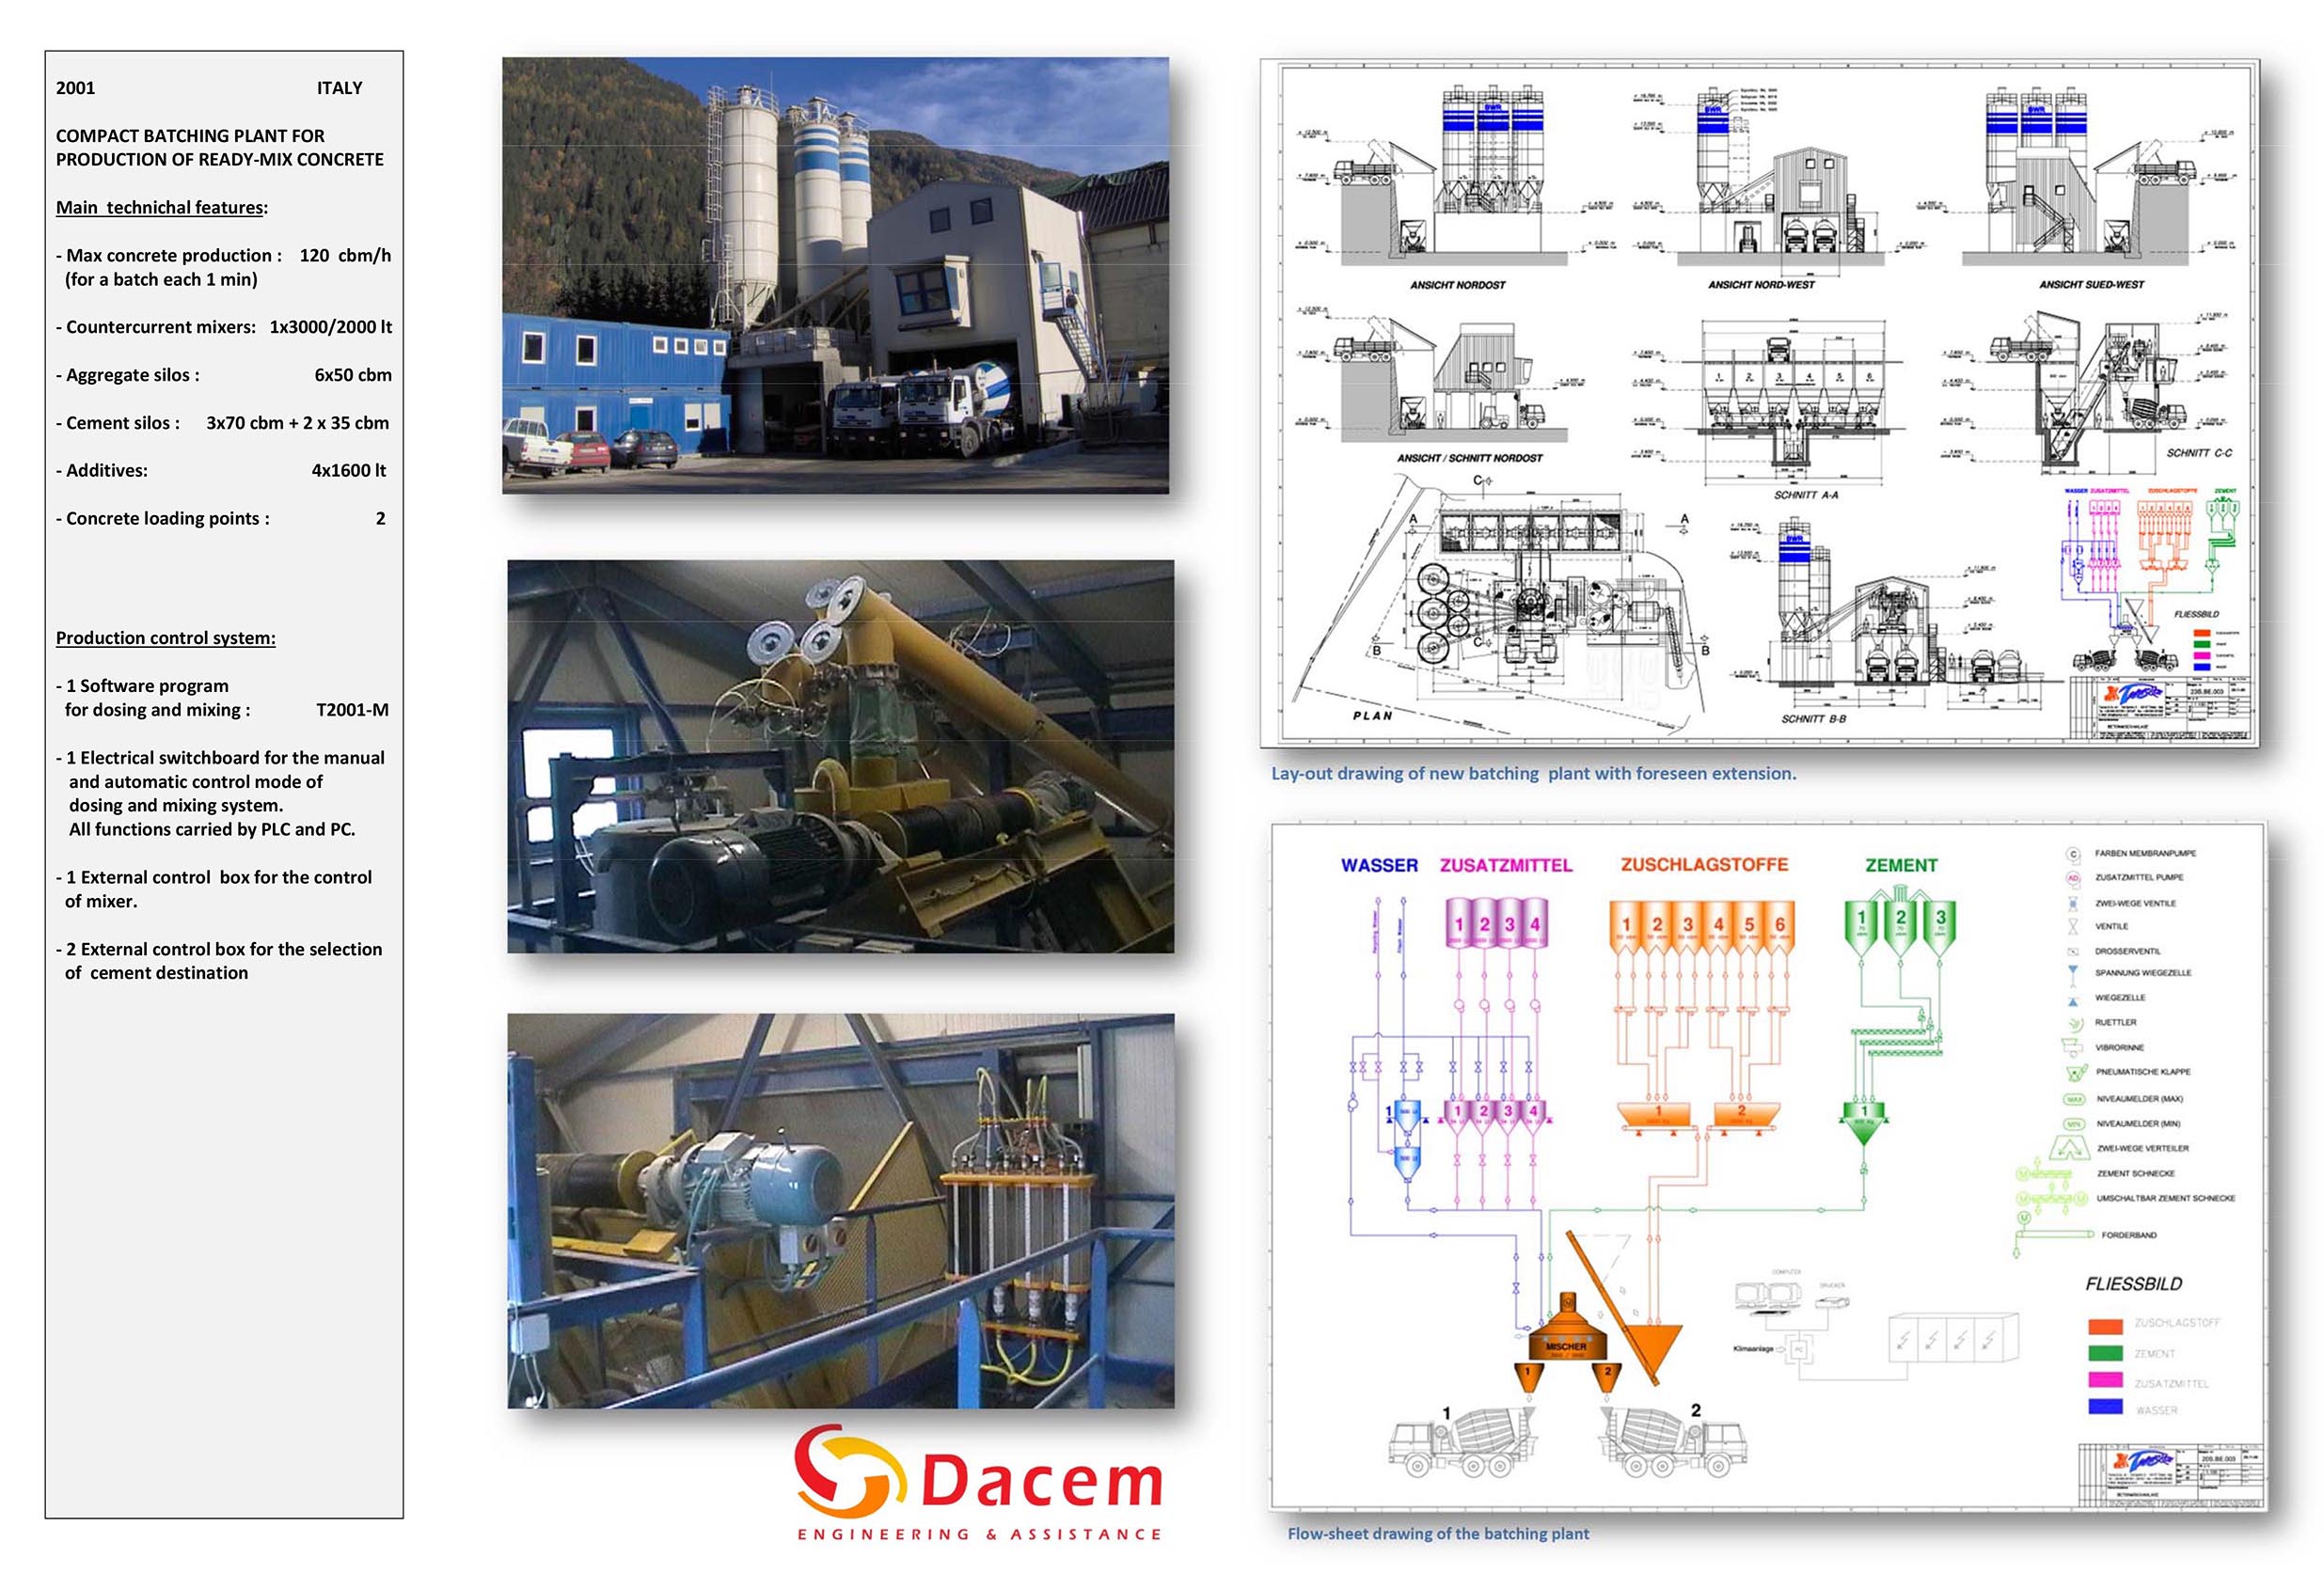 batching-and-mixing-plants-for-ready-mix-production-taurus-concretelle-engineering-italy-2001